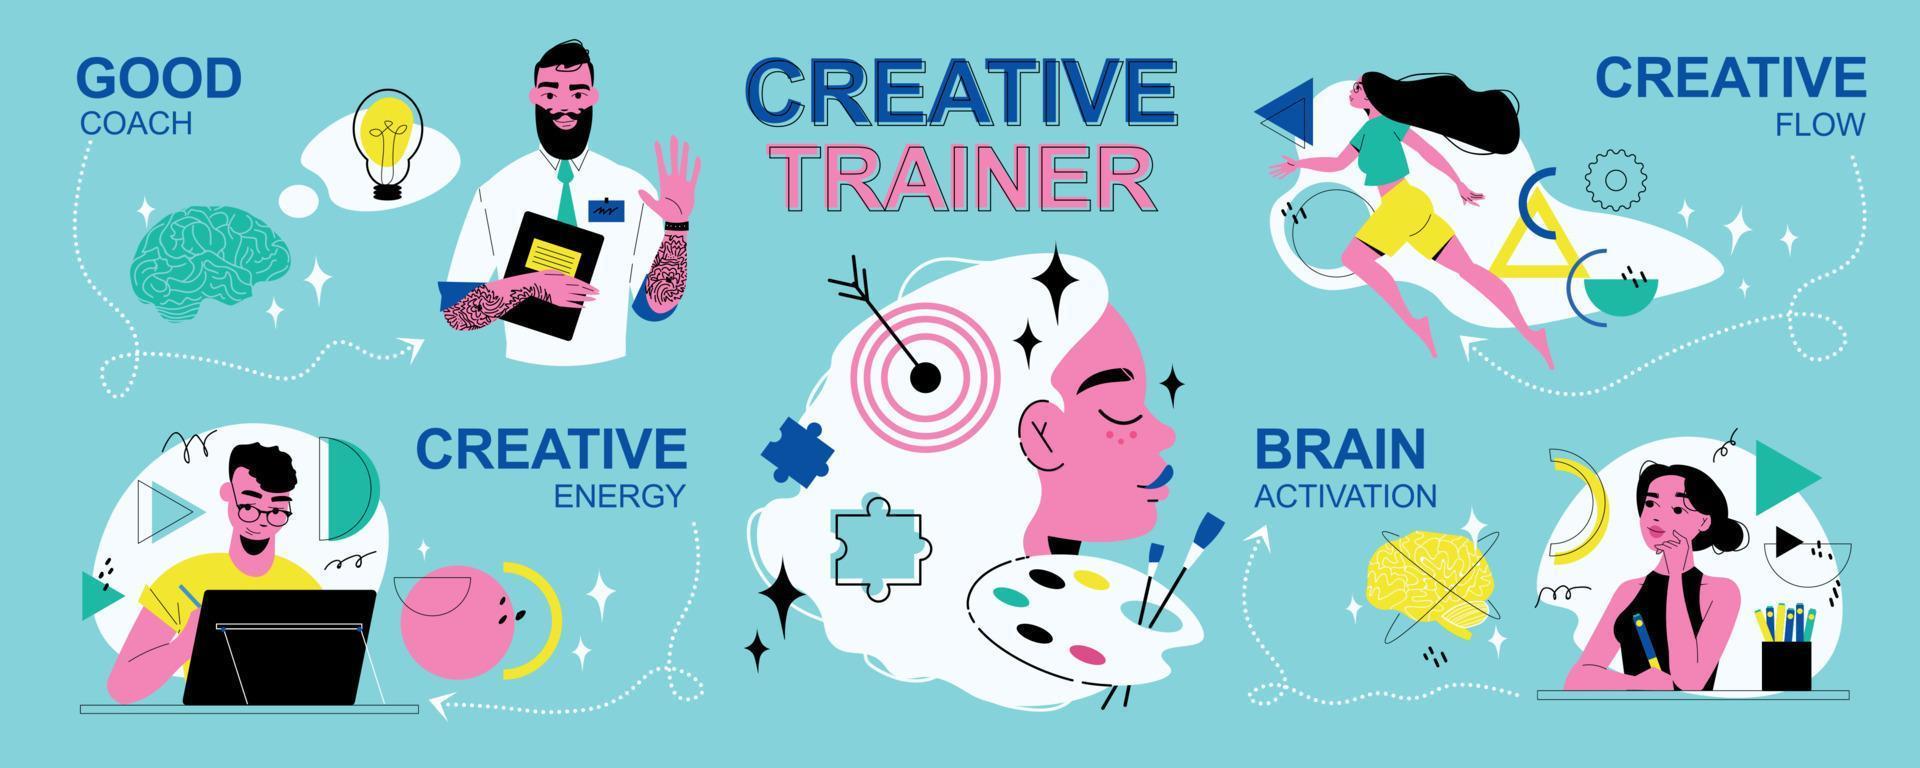 Creative Trainer Poster vector